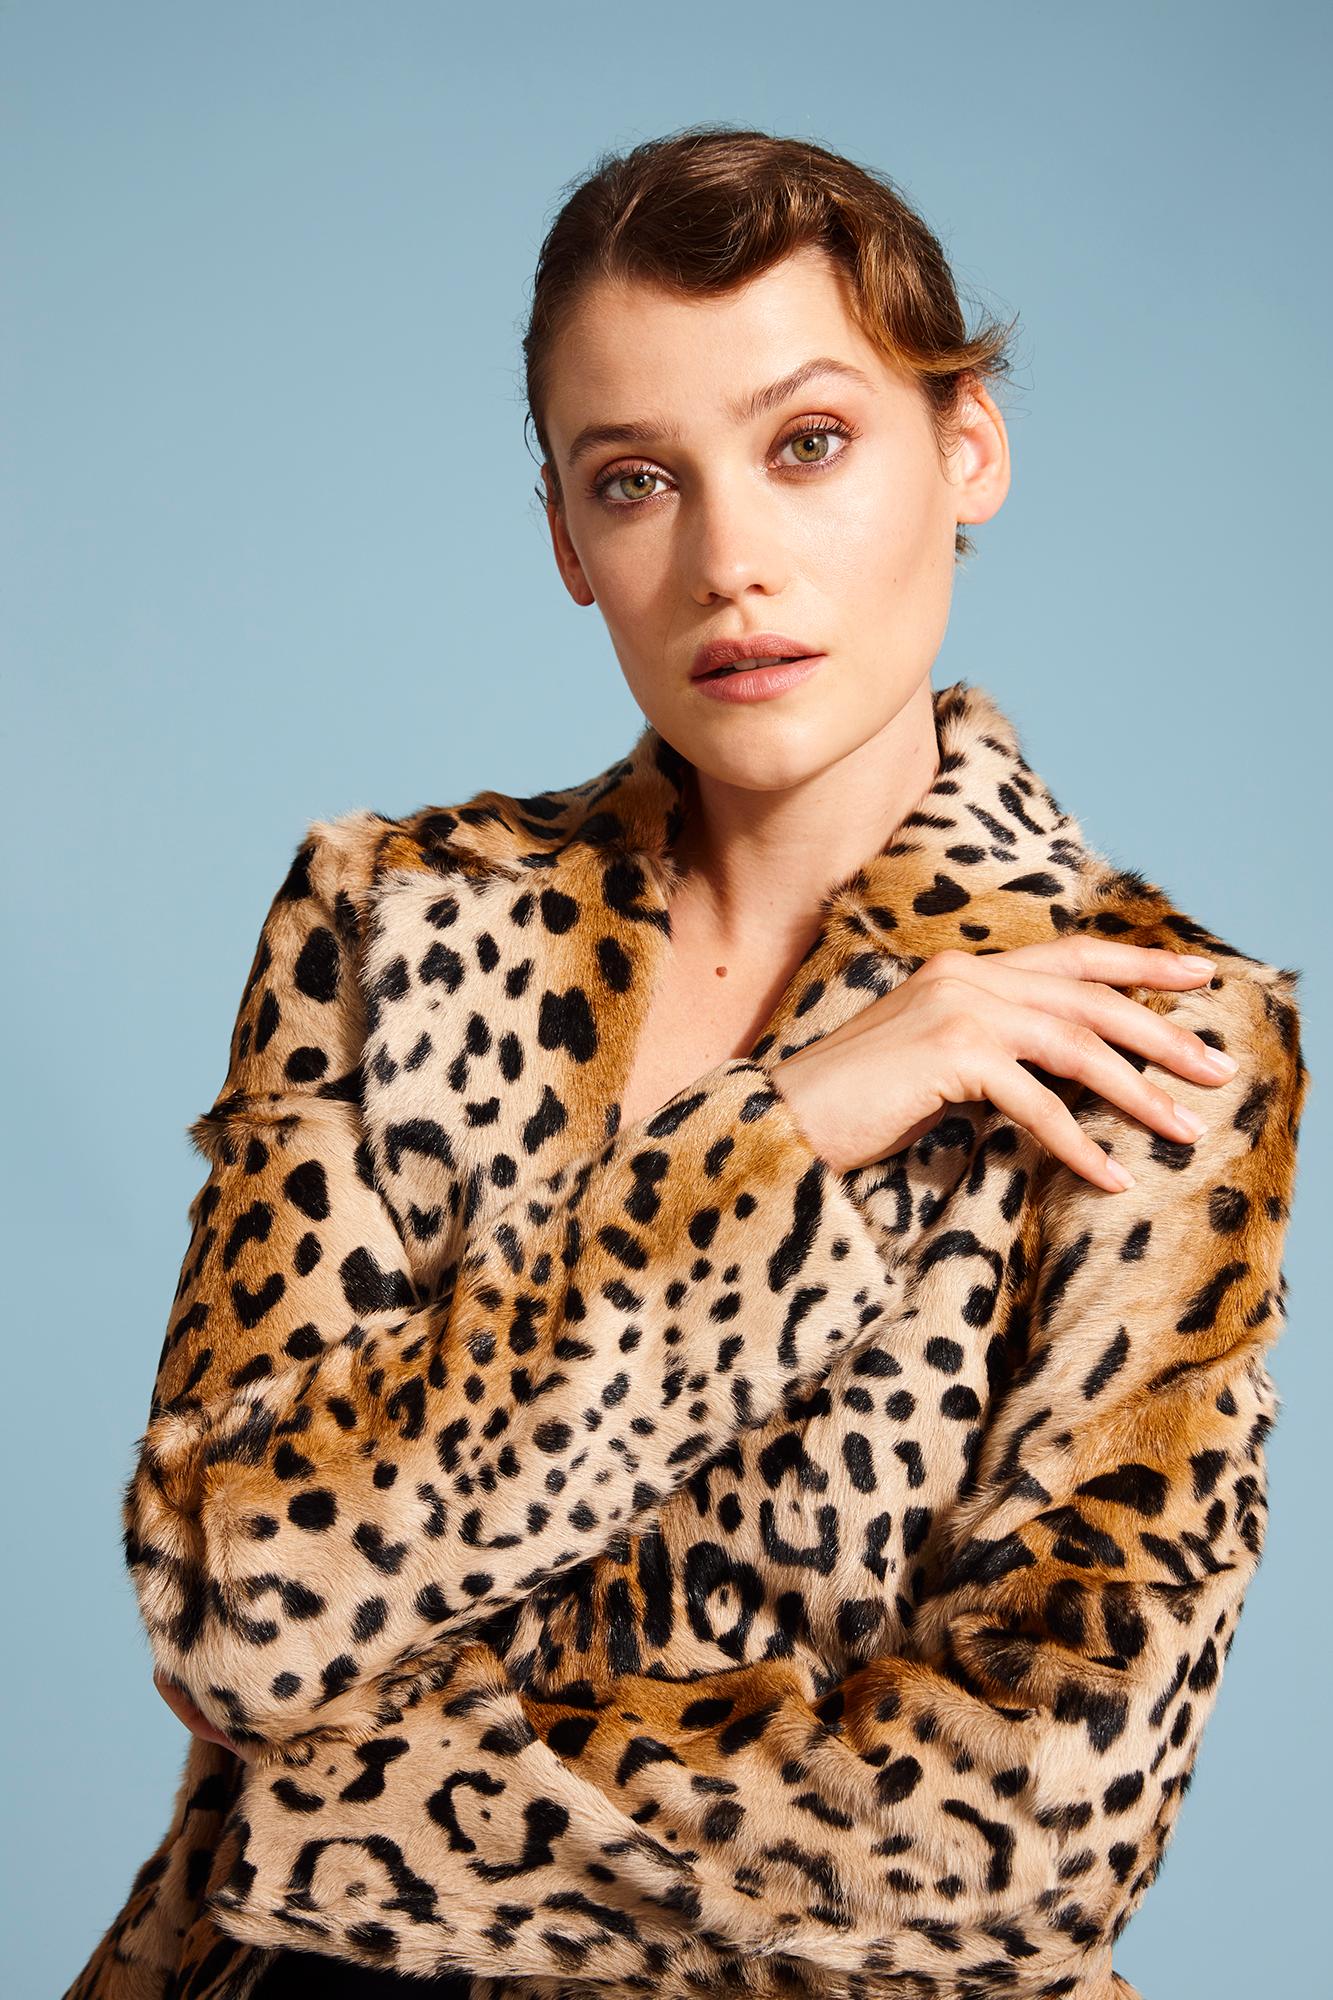 Verheyen London Leopard Print Coat in Natural Goat Hair Fur UK 8  - Brand New 
RRP Price £1,695

This Leopard print coat is Verheyen London’s classic staple for effortless style and glamour.
A coat for dressing up and down with jeans or a